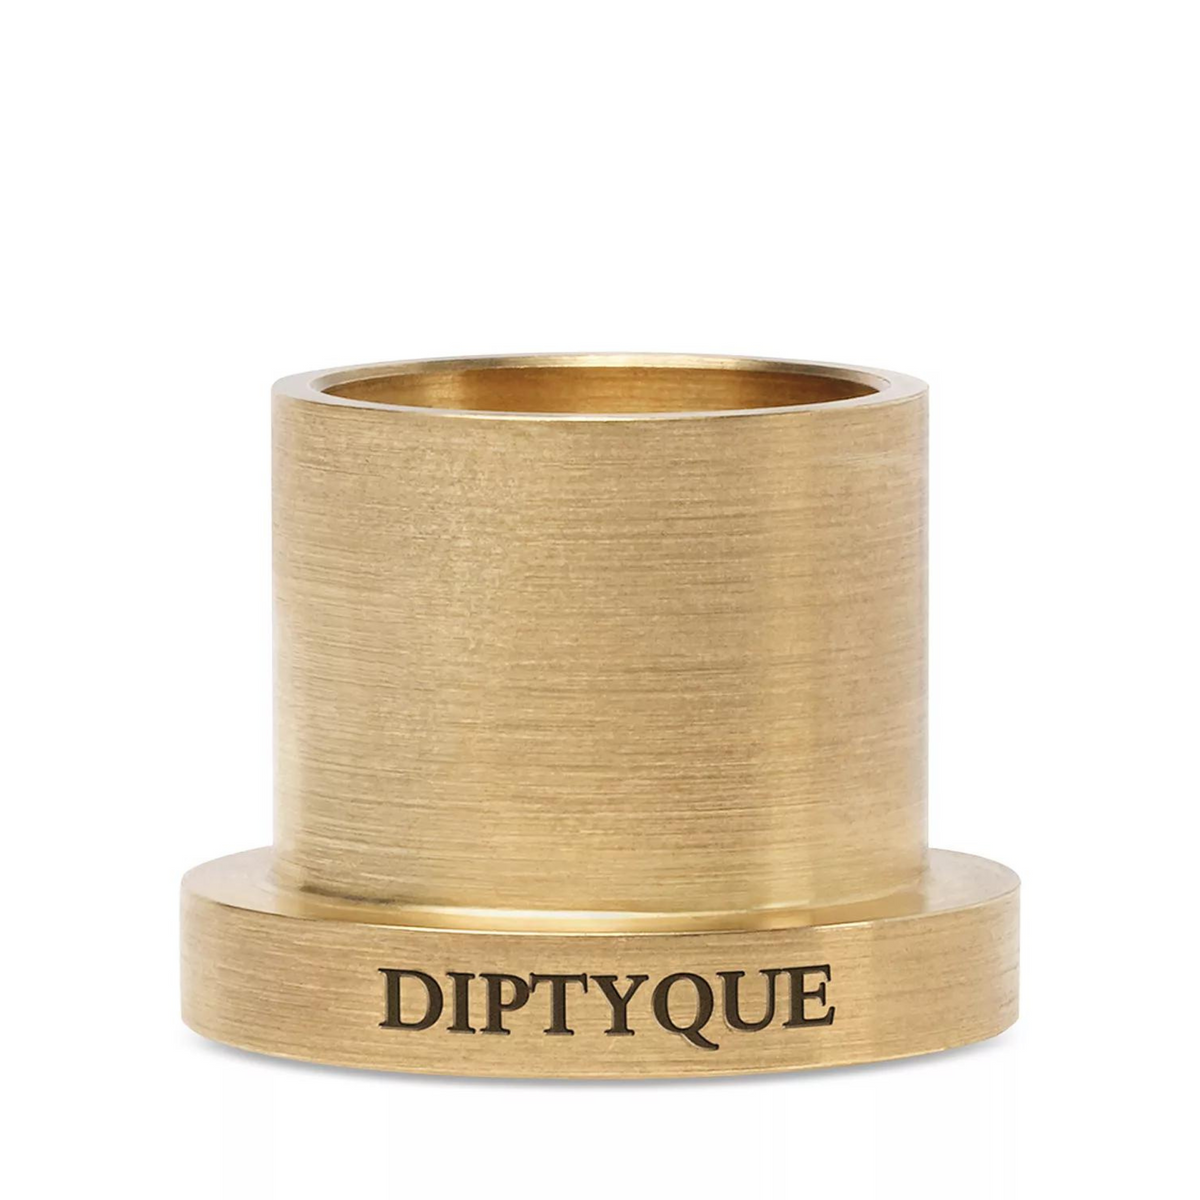 Primary Image of diptyque Paris Limited Brass Taper-Candle Holder